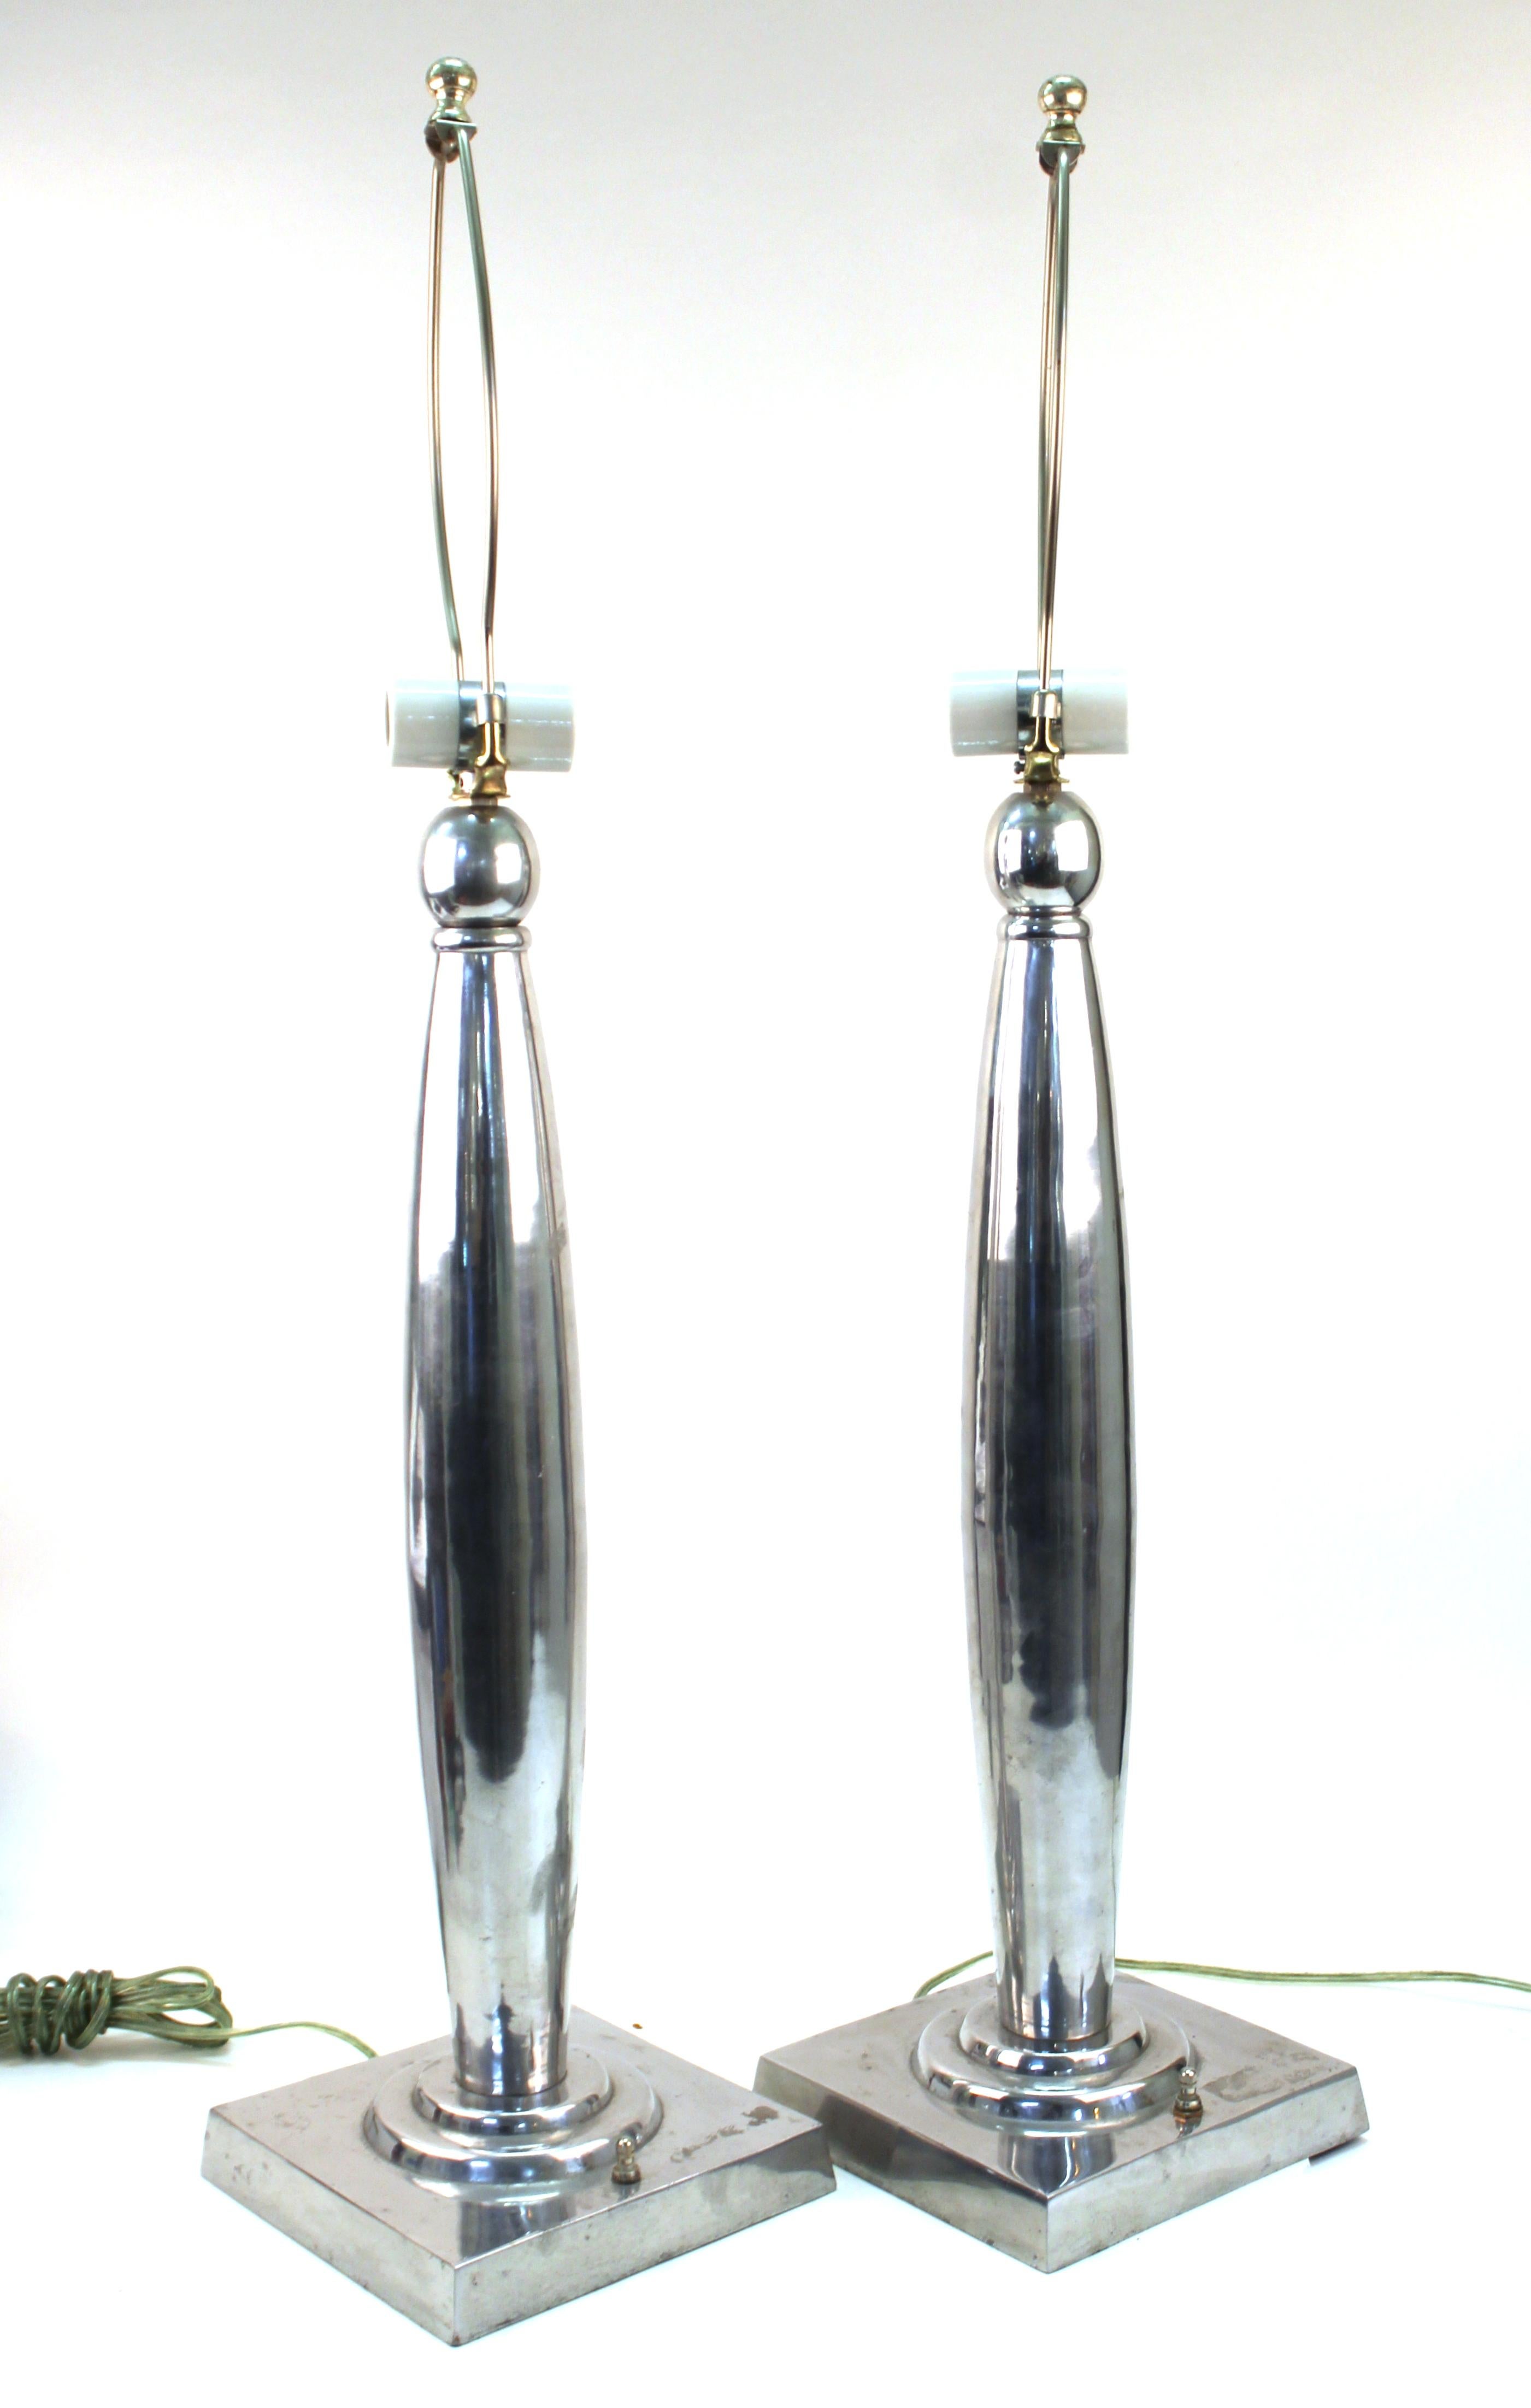 Postmodern pair of table lamps in polished aluminum. The lamps have two sockets each and were likely made in the late 20th century. In great vintage condition with age-appropriate wear and use.